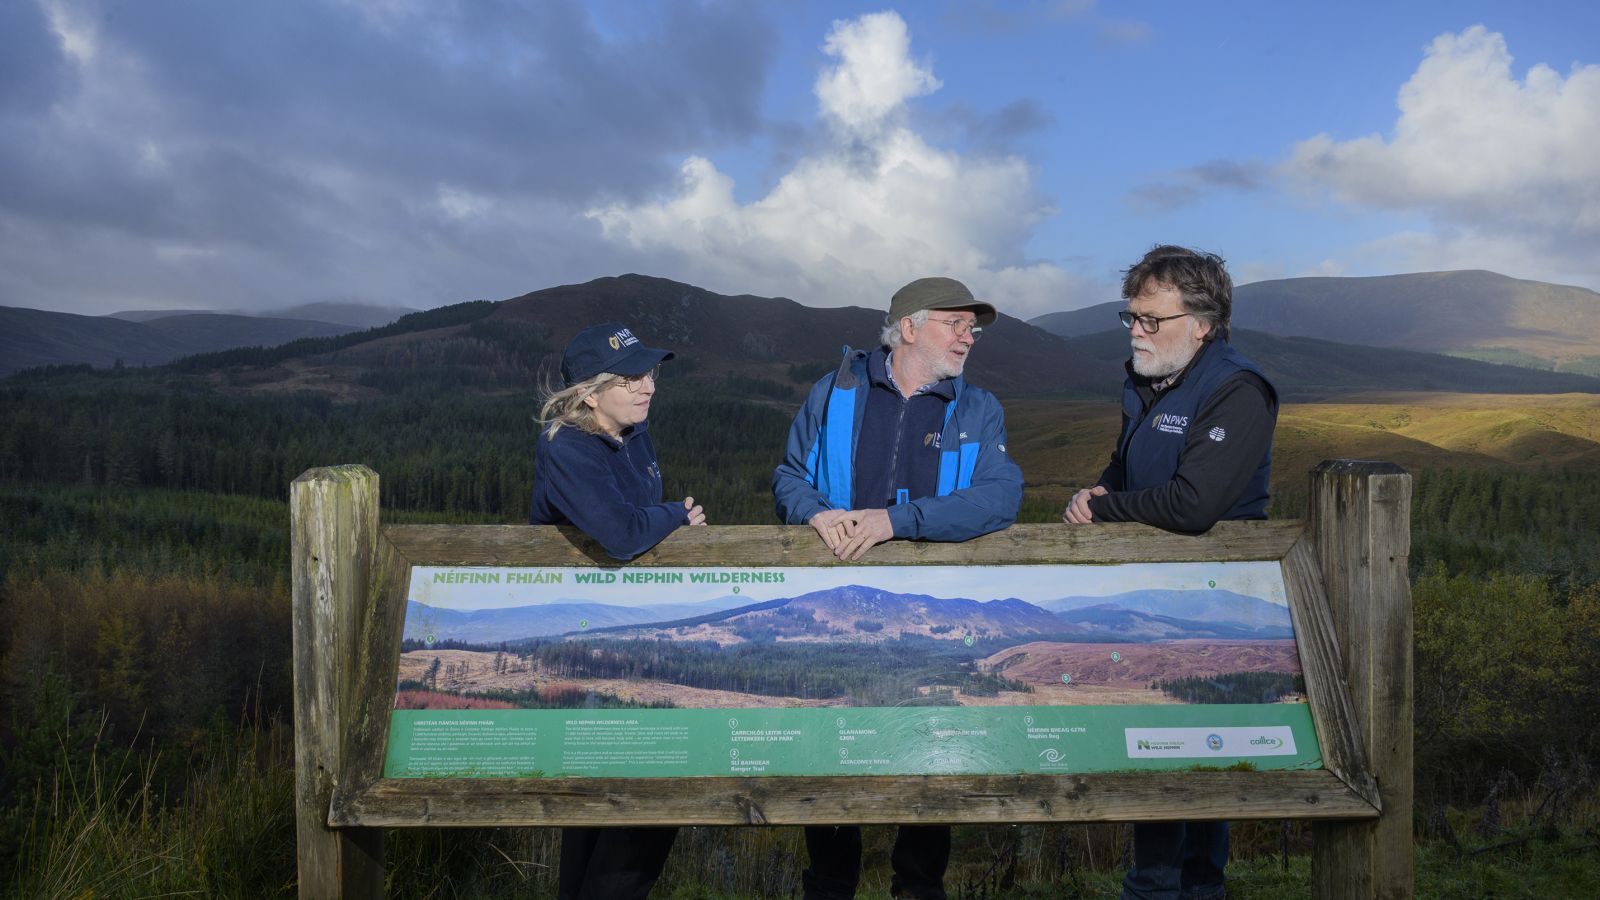 Minister Noonan and Wild Nephin National Park Colleagues